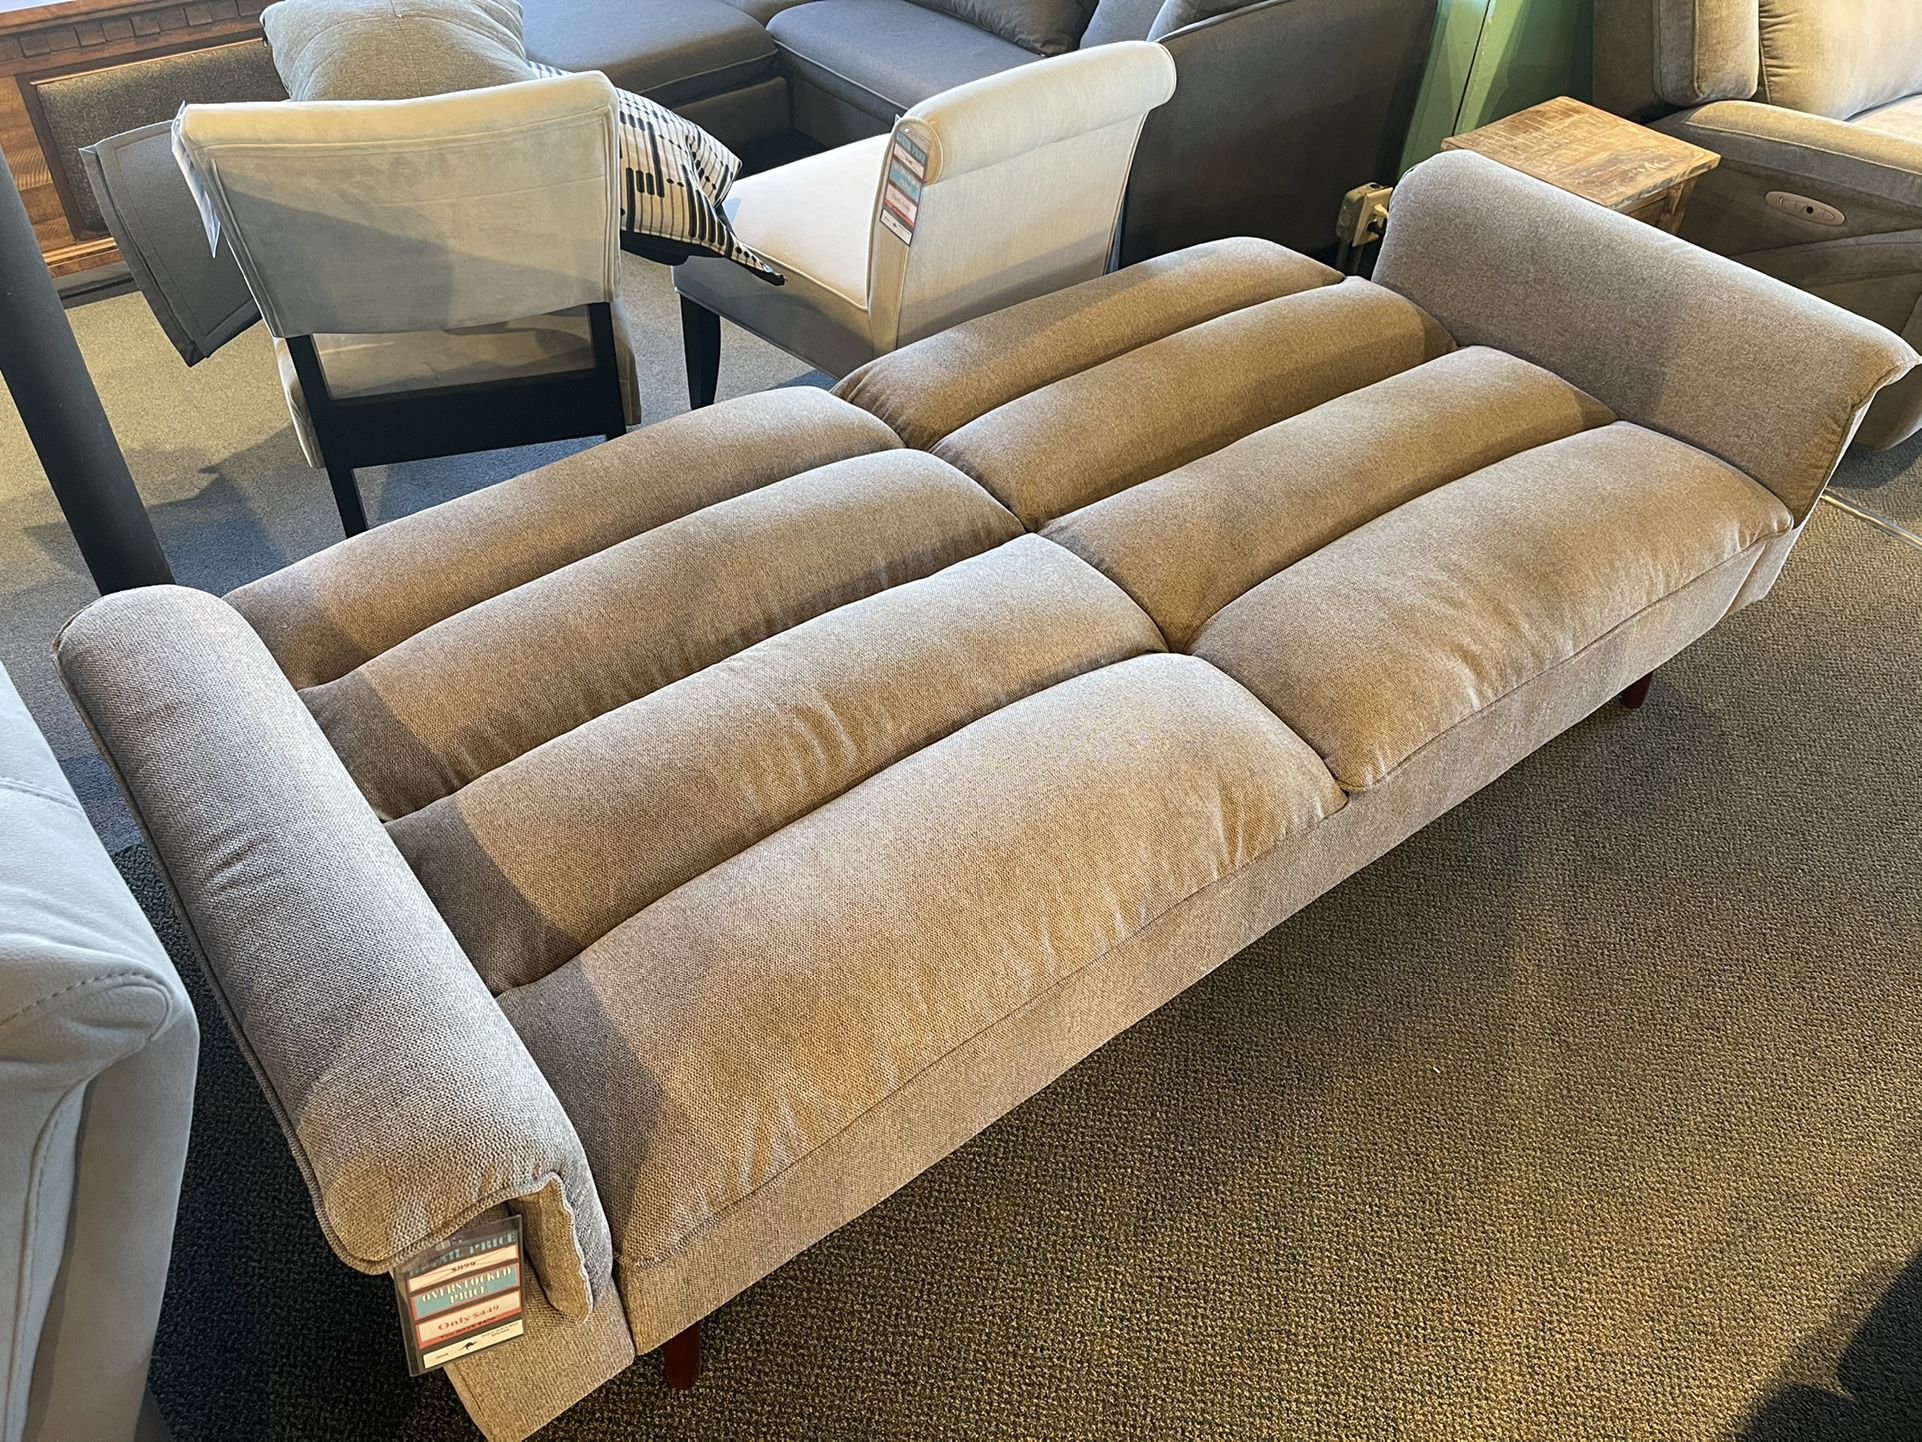 This sofa bed/futon is both comfortable and stylish